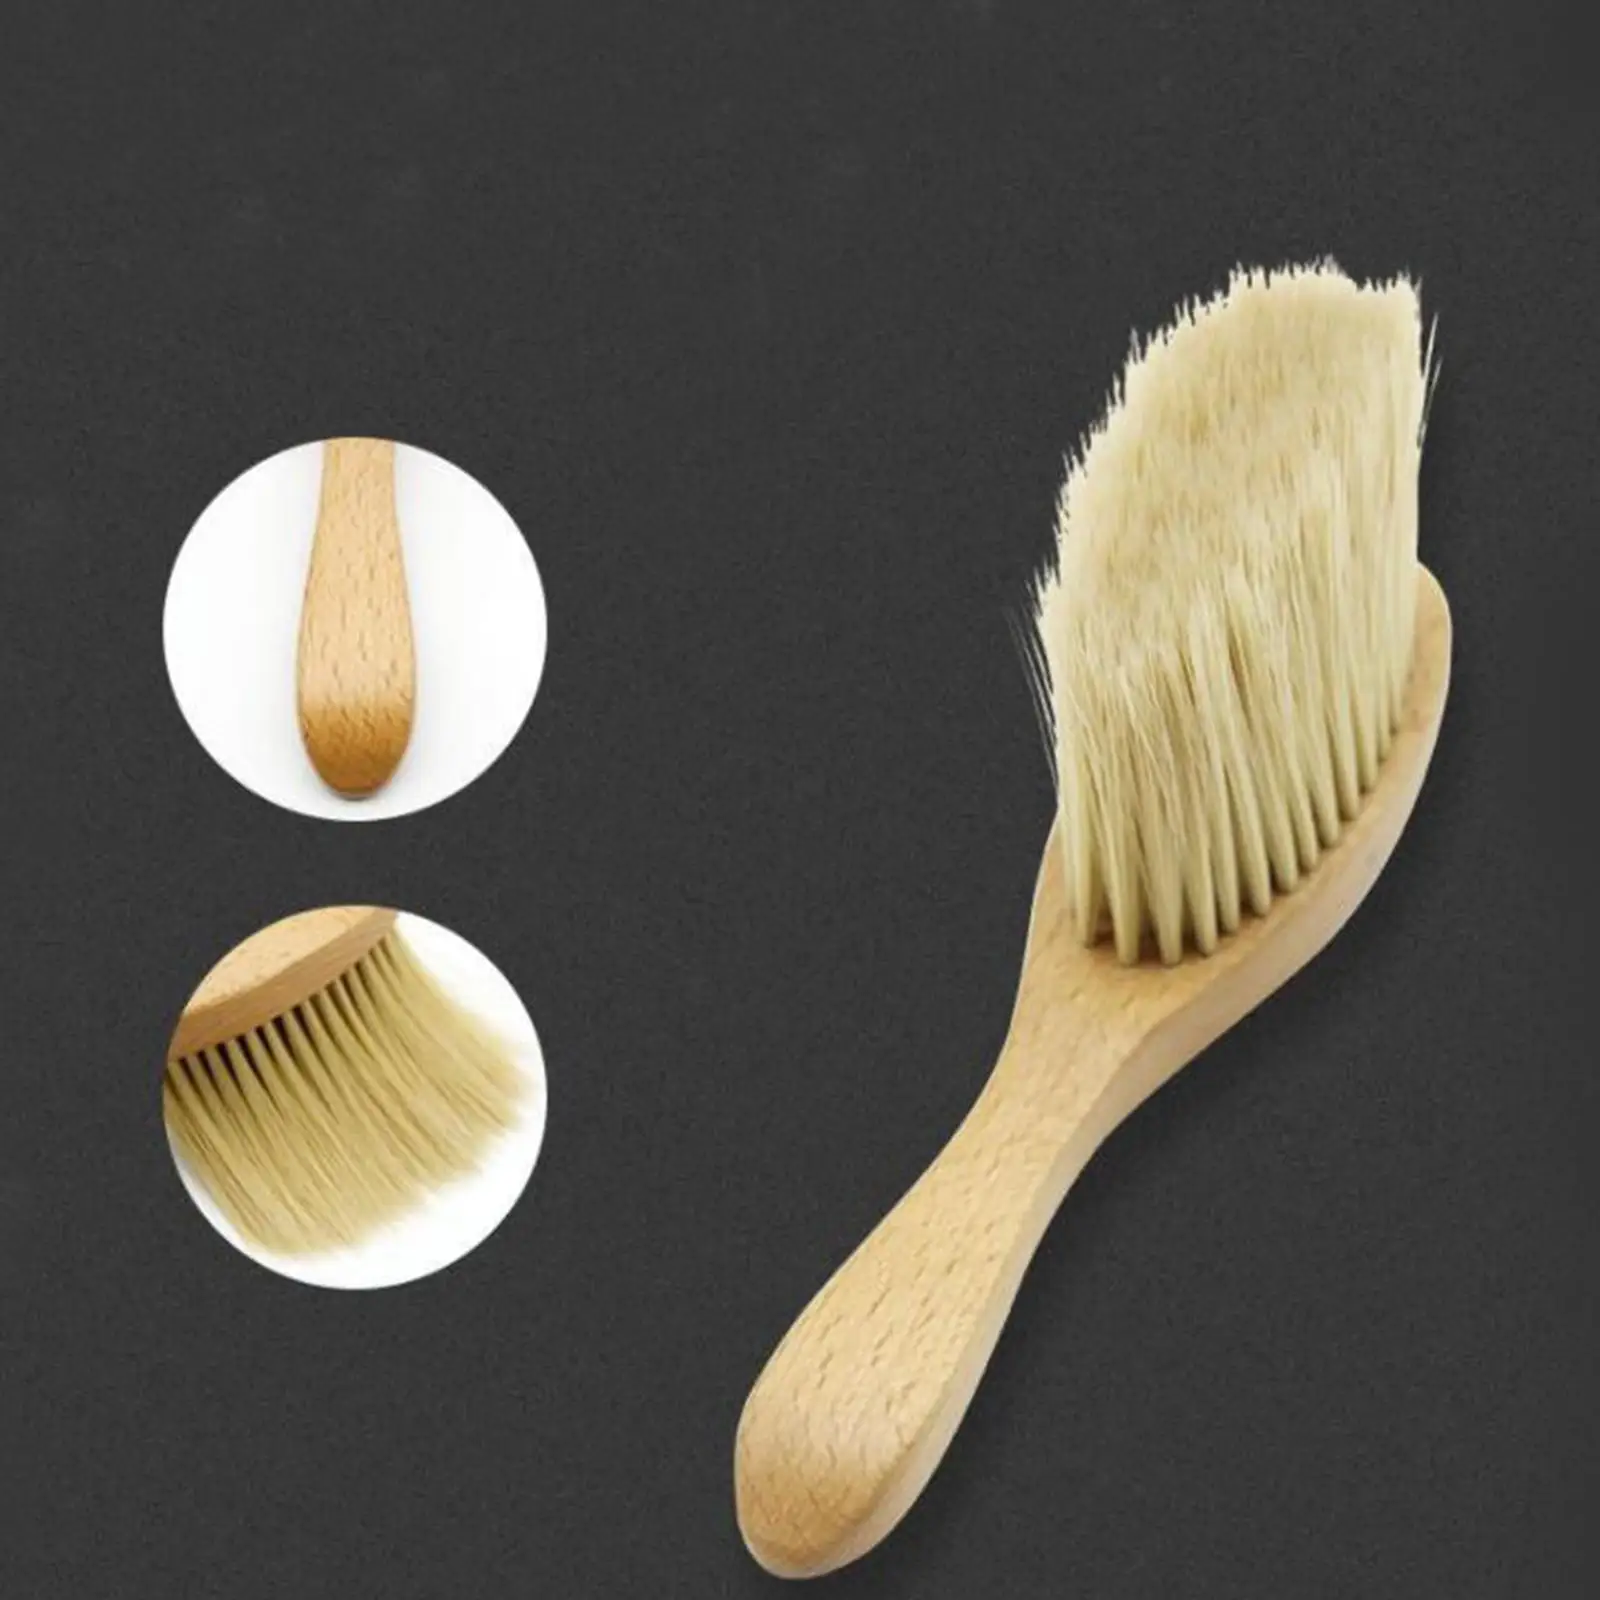 2x Nylon Hair Cleaning Brush with Wood Handle Salon Men Brush Hairdressing Daily Use 17x3.7cm